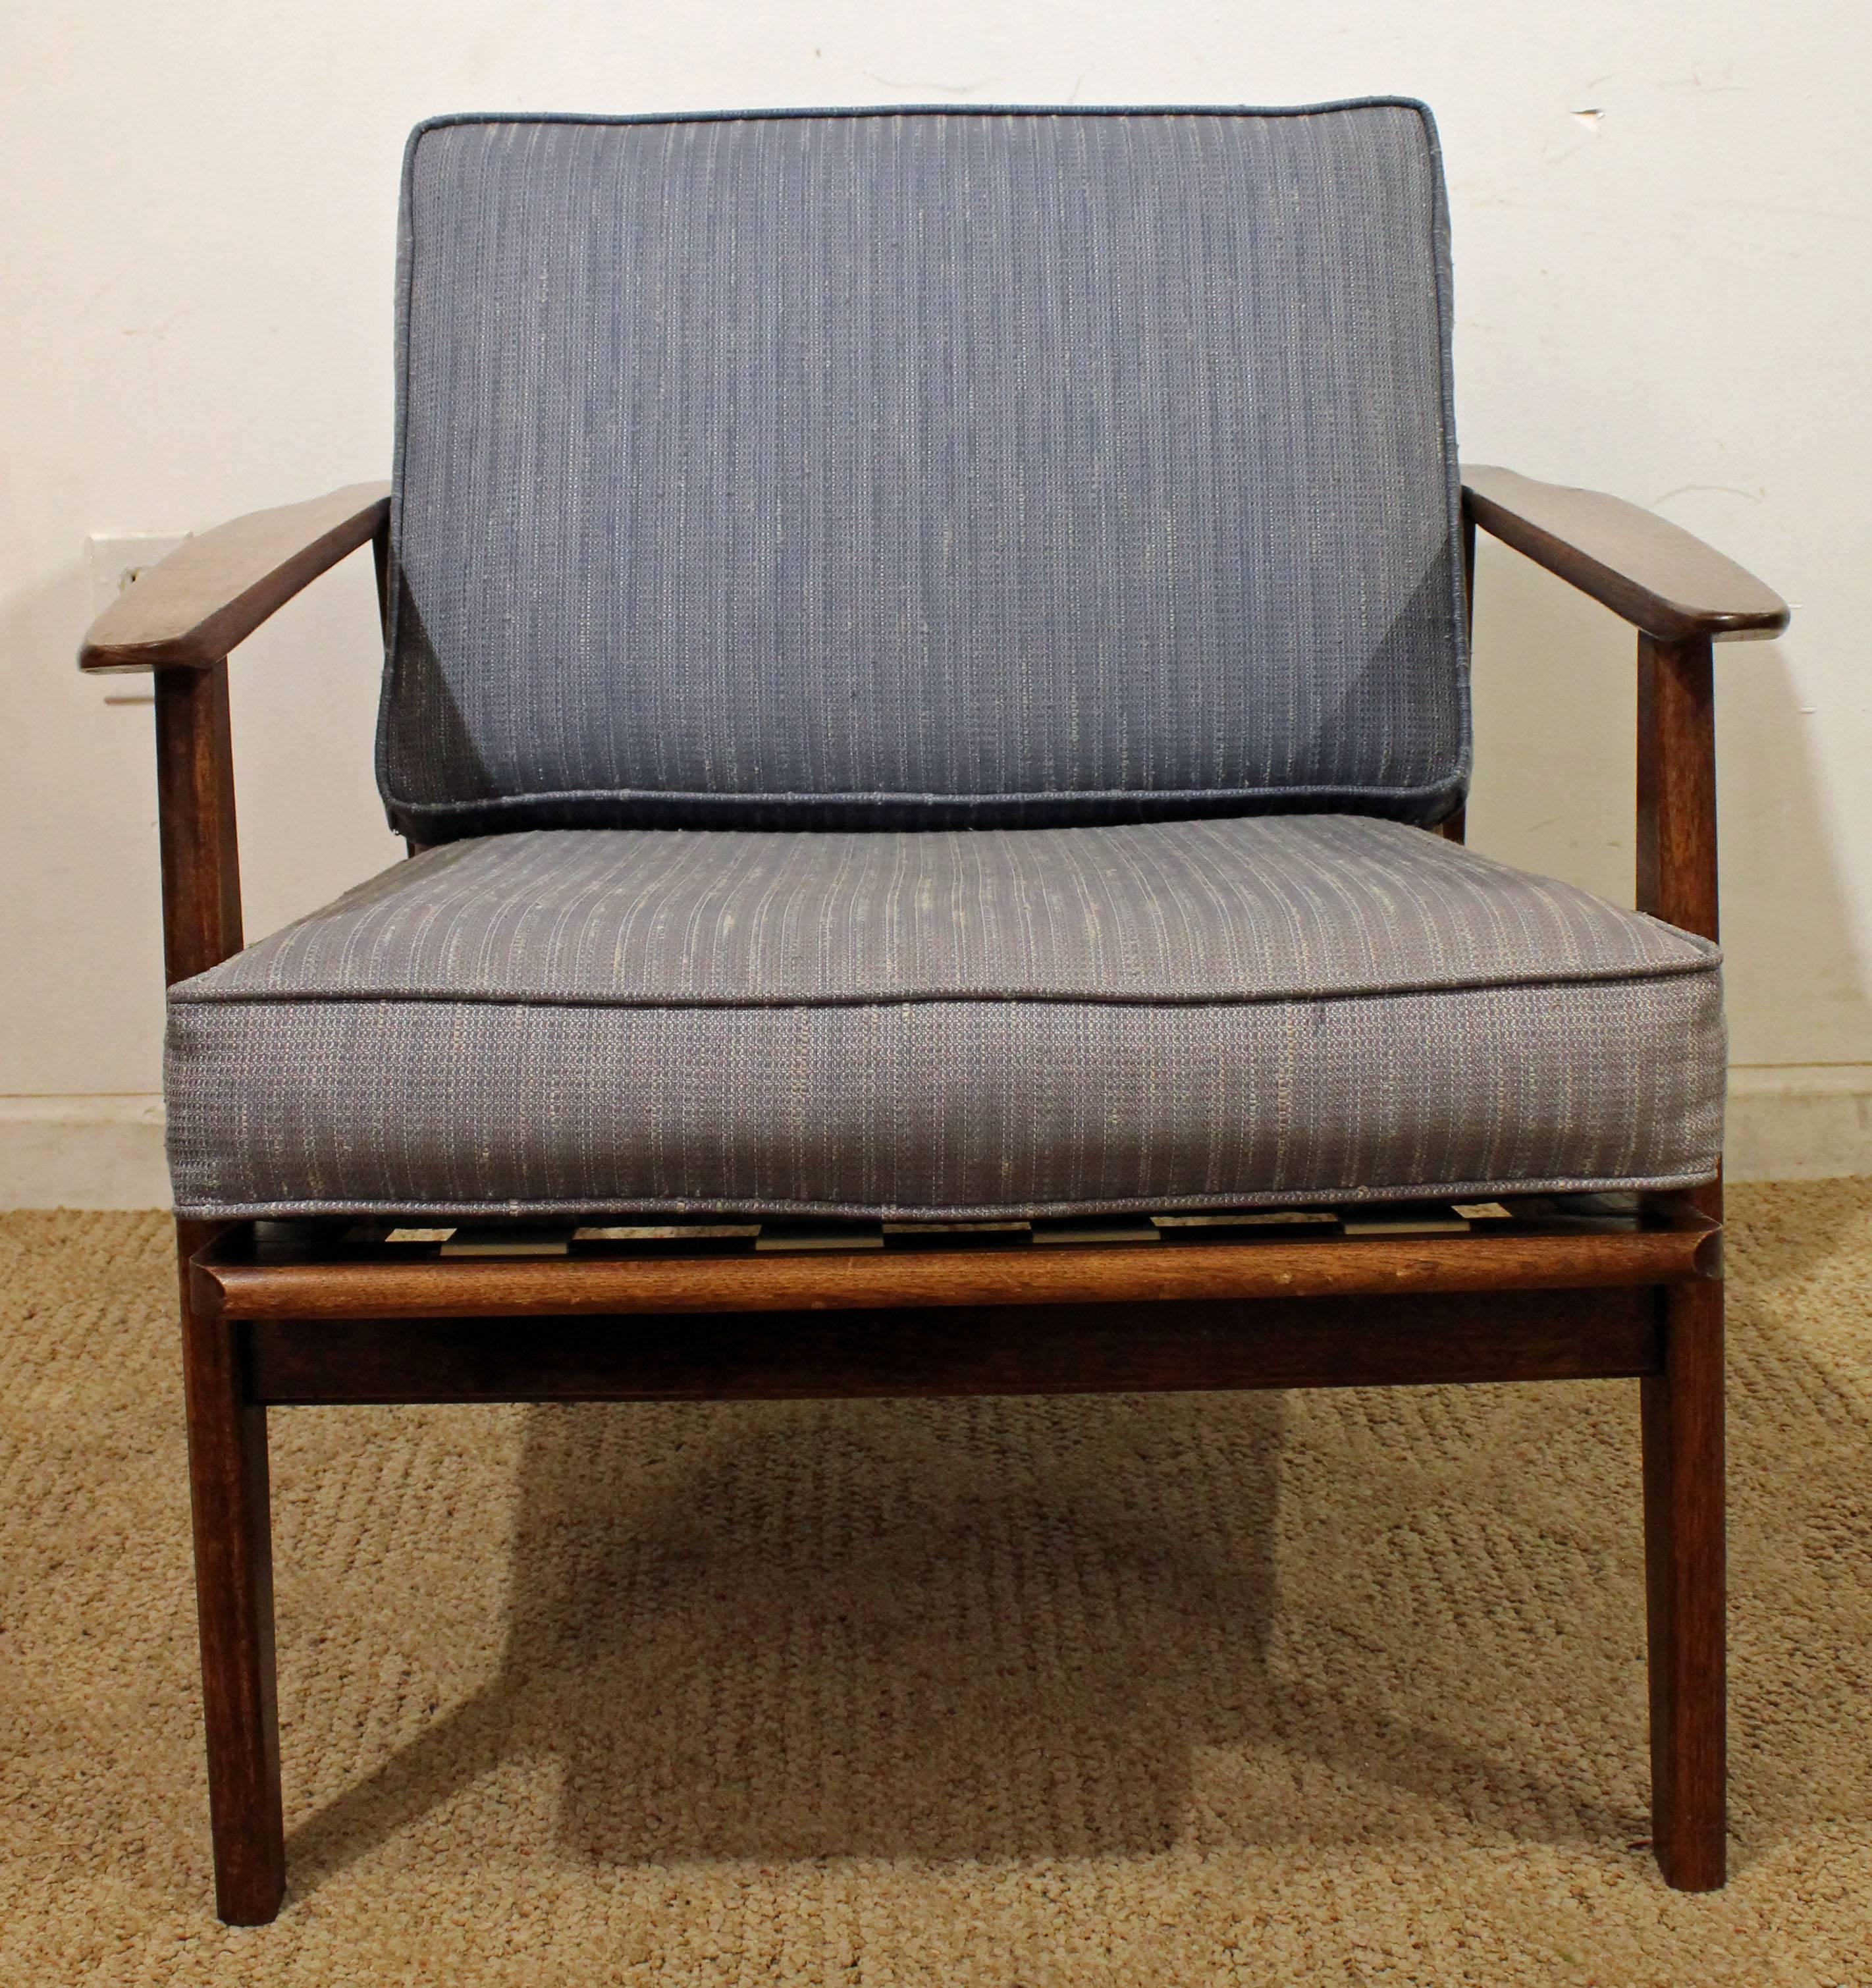 This vintage piece is made of walnut and has blue upholstery. It is in good condition, showing some fading/wear on upholstery. Frame is tight and sturdy.

  